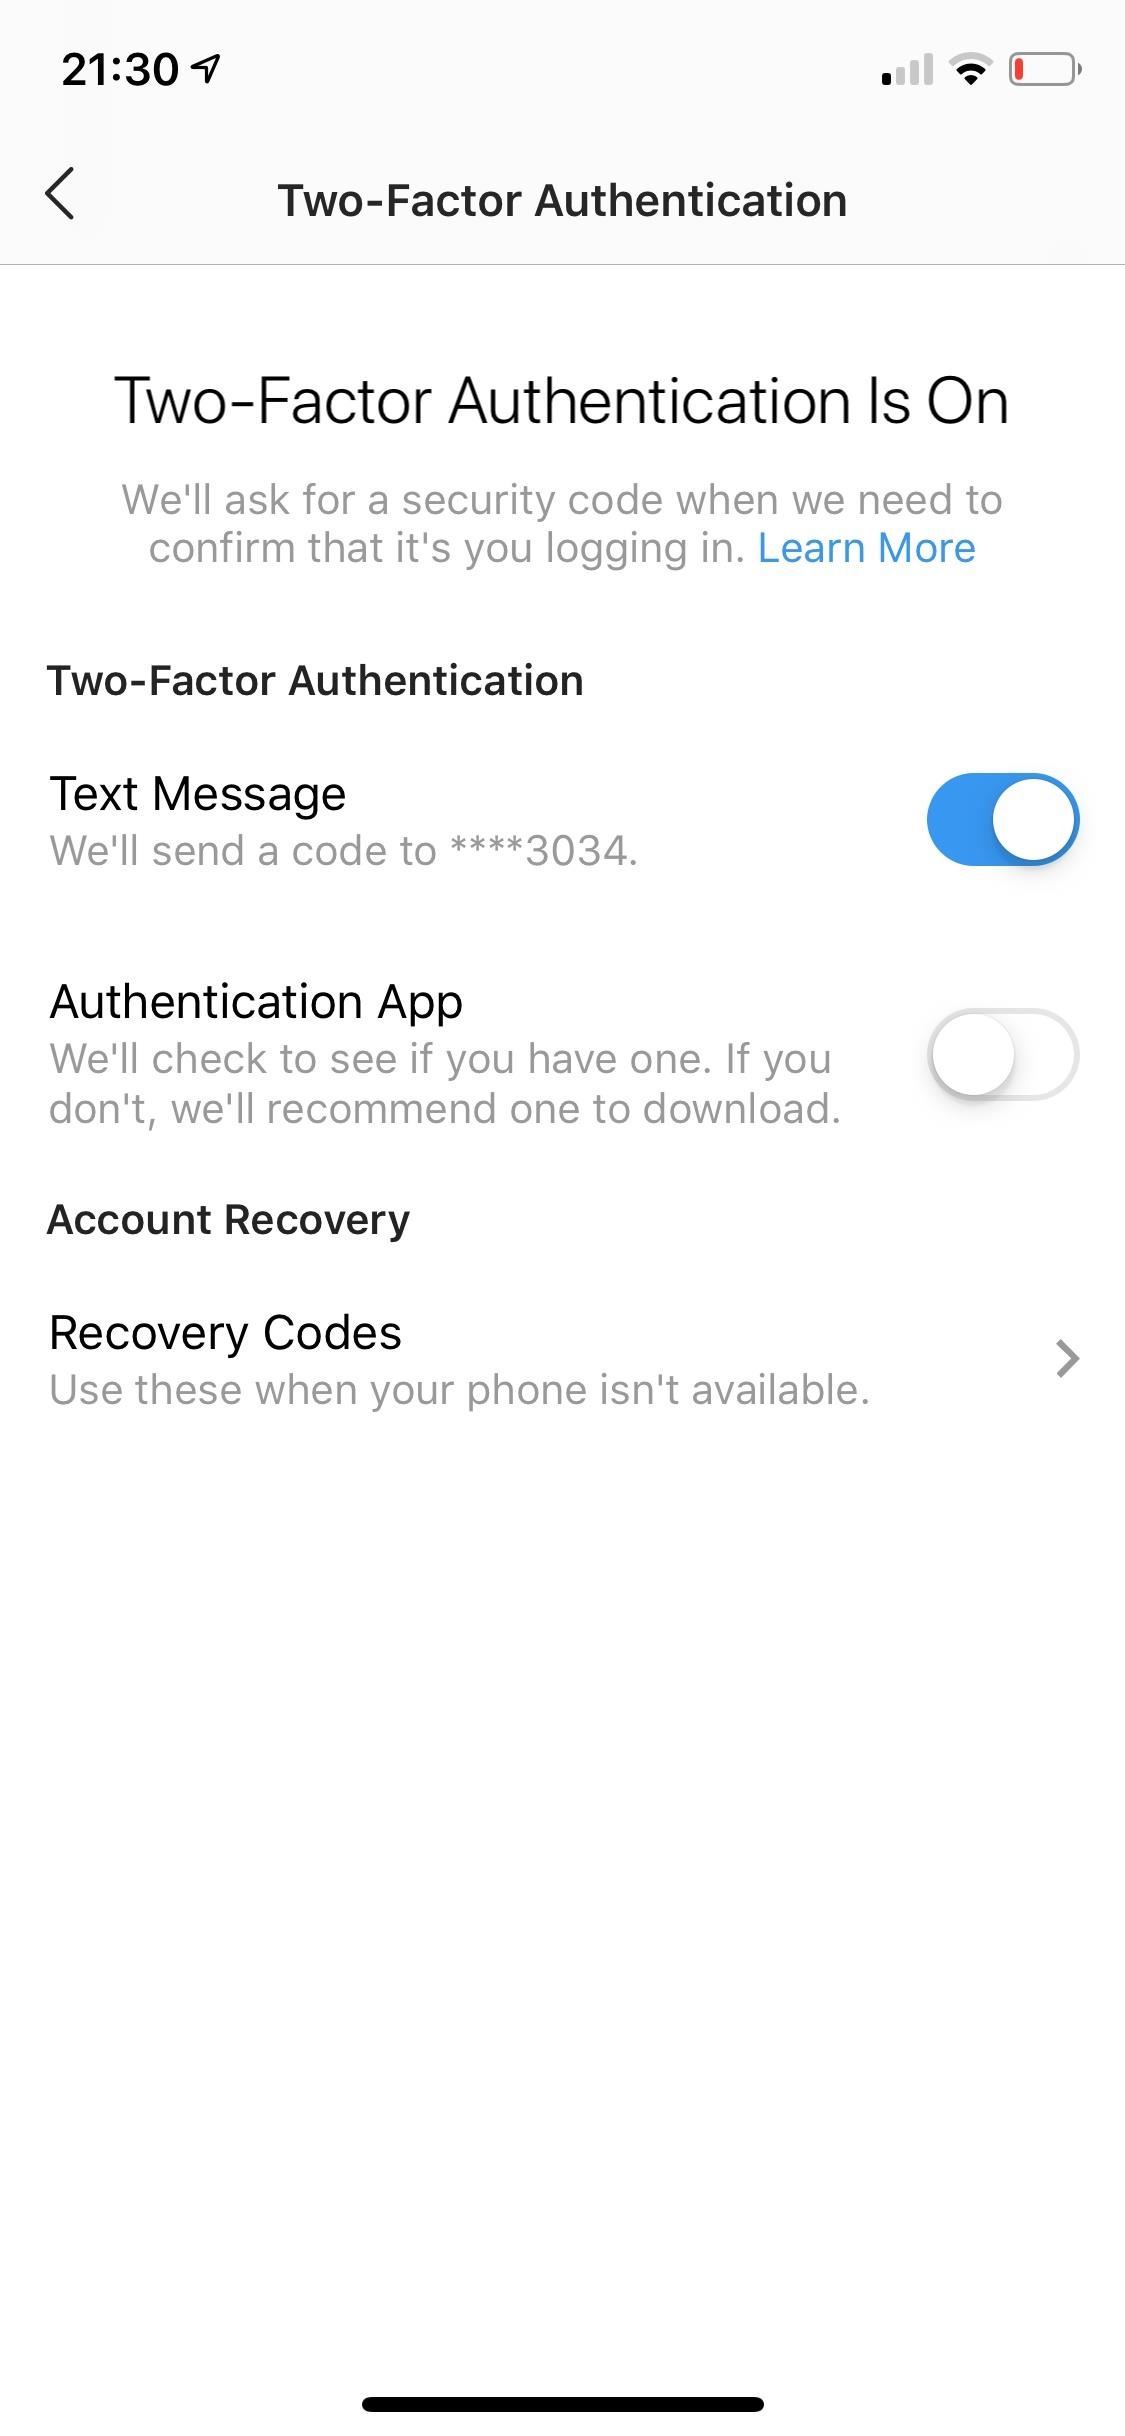 How to Set Up Instagram Recovery Codes So You Can Always Access Your Account with 2FA Enabled